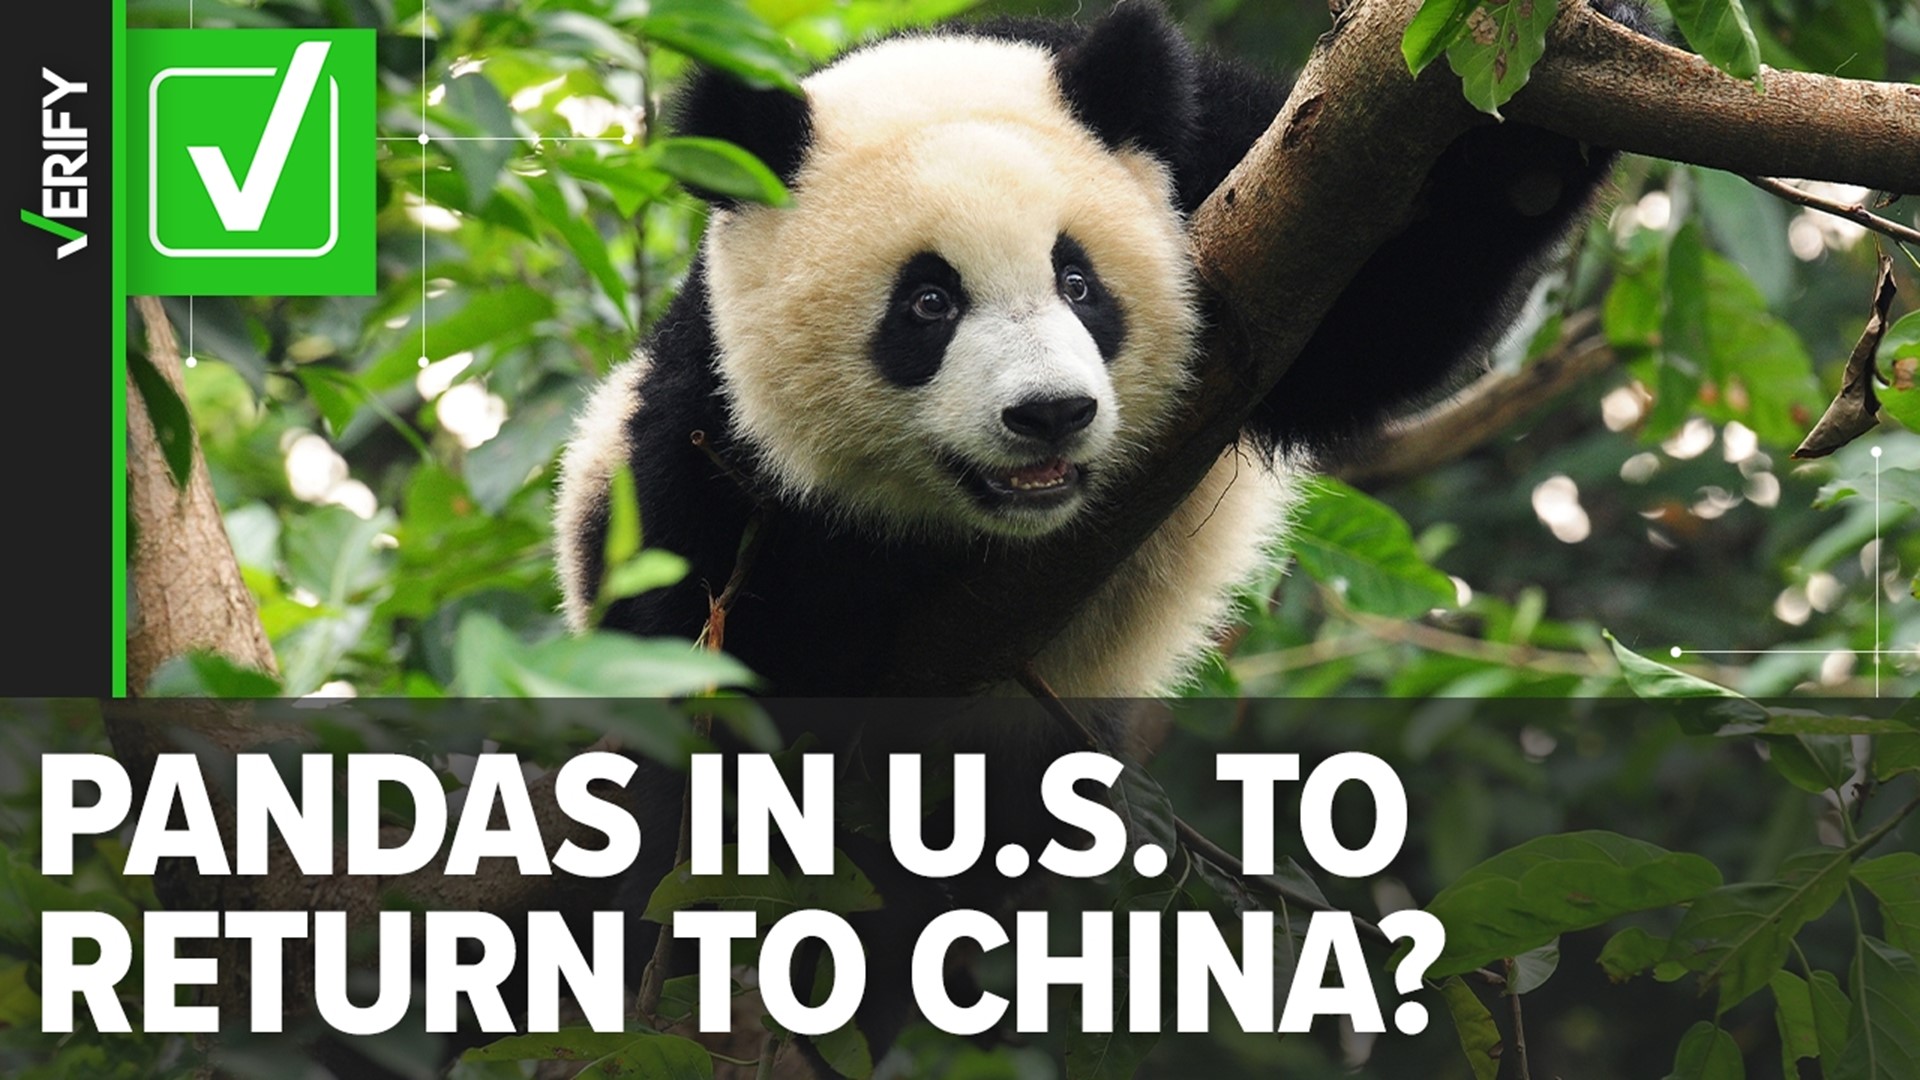 Pandas in U.S. zoos set to return to China by end of 2024